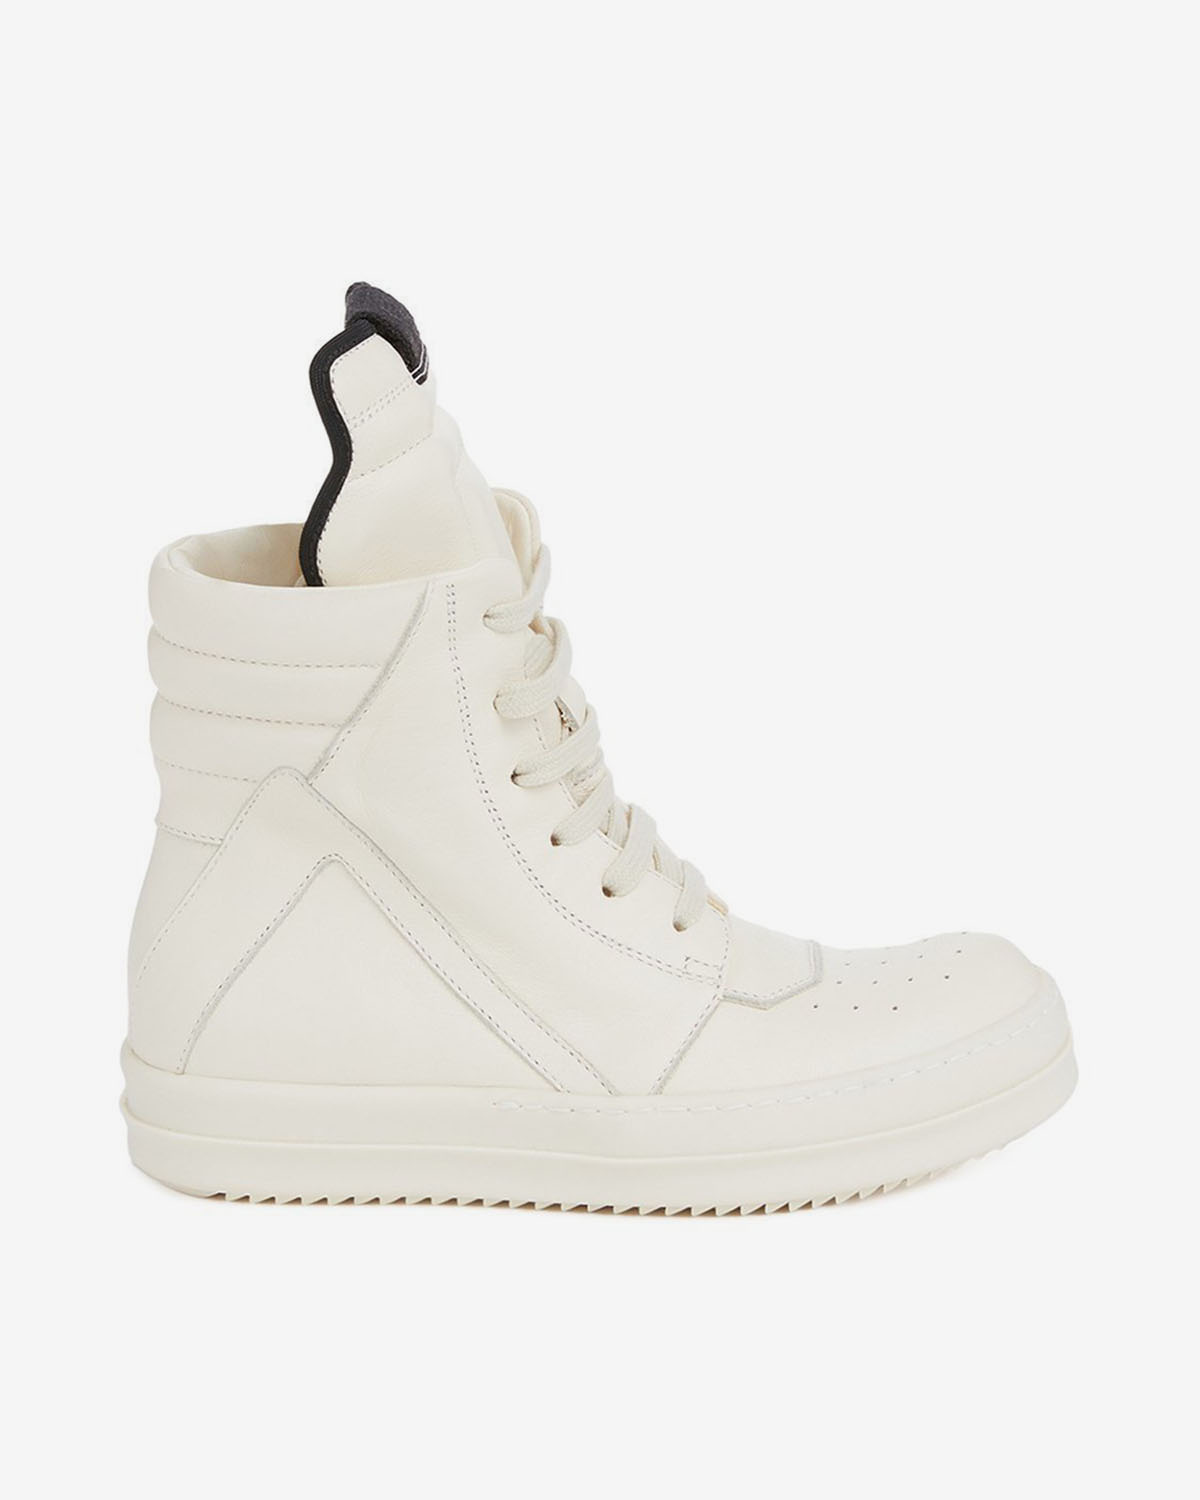 Rick Owens Releases Kid-Sized Geobaskets For Goth Babies